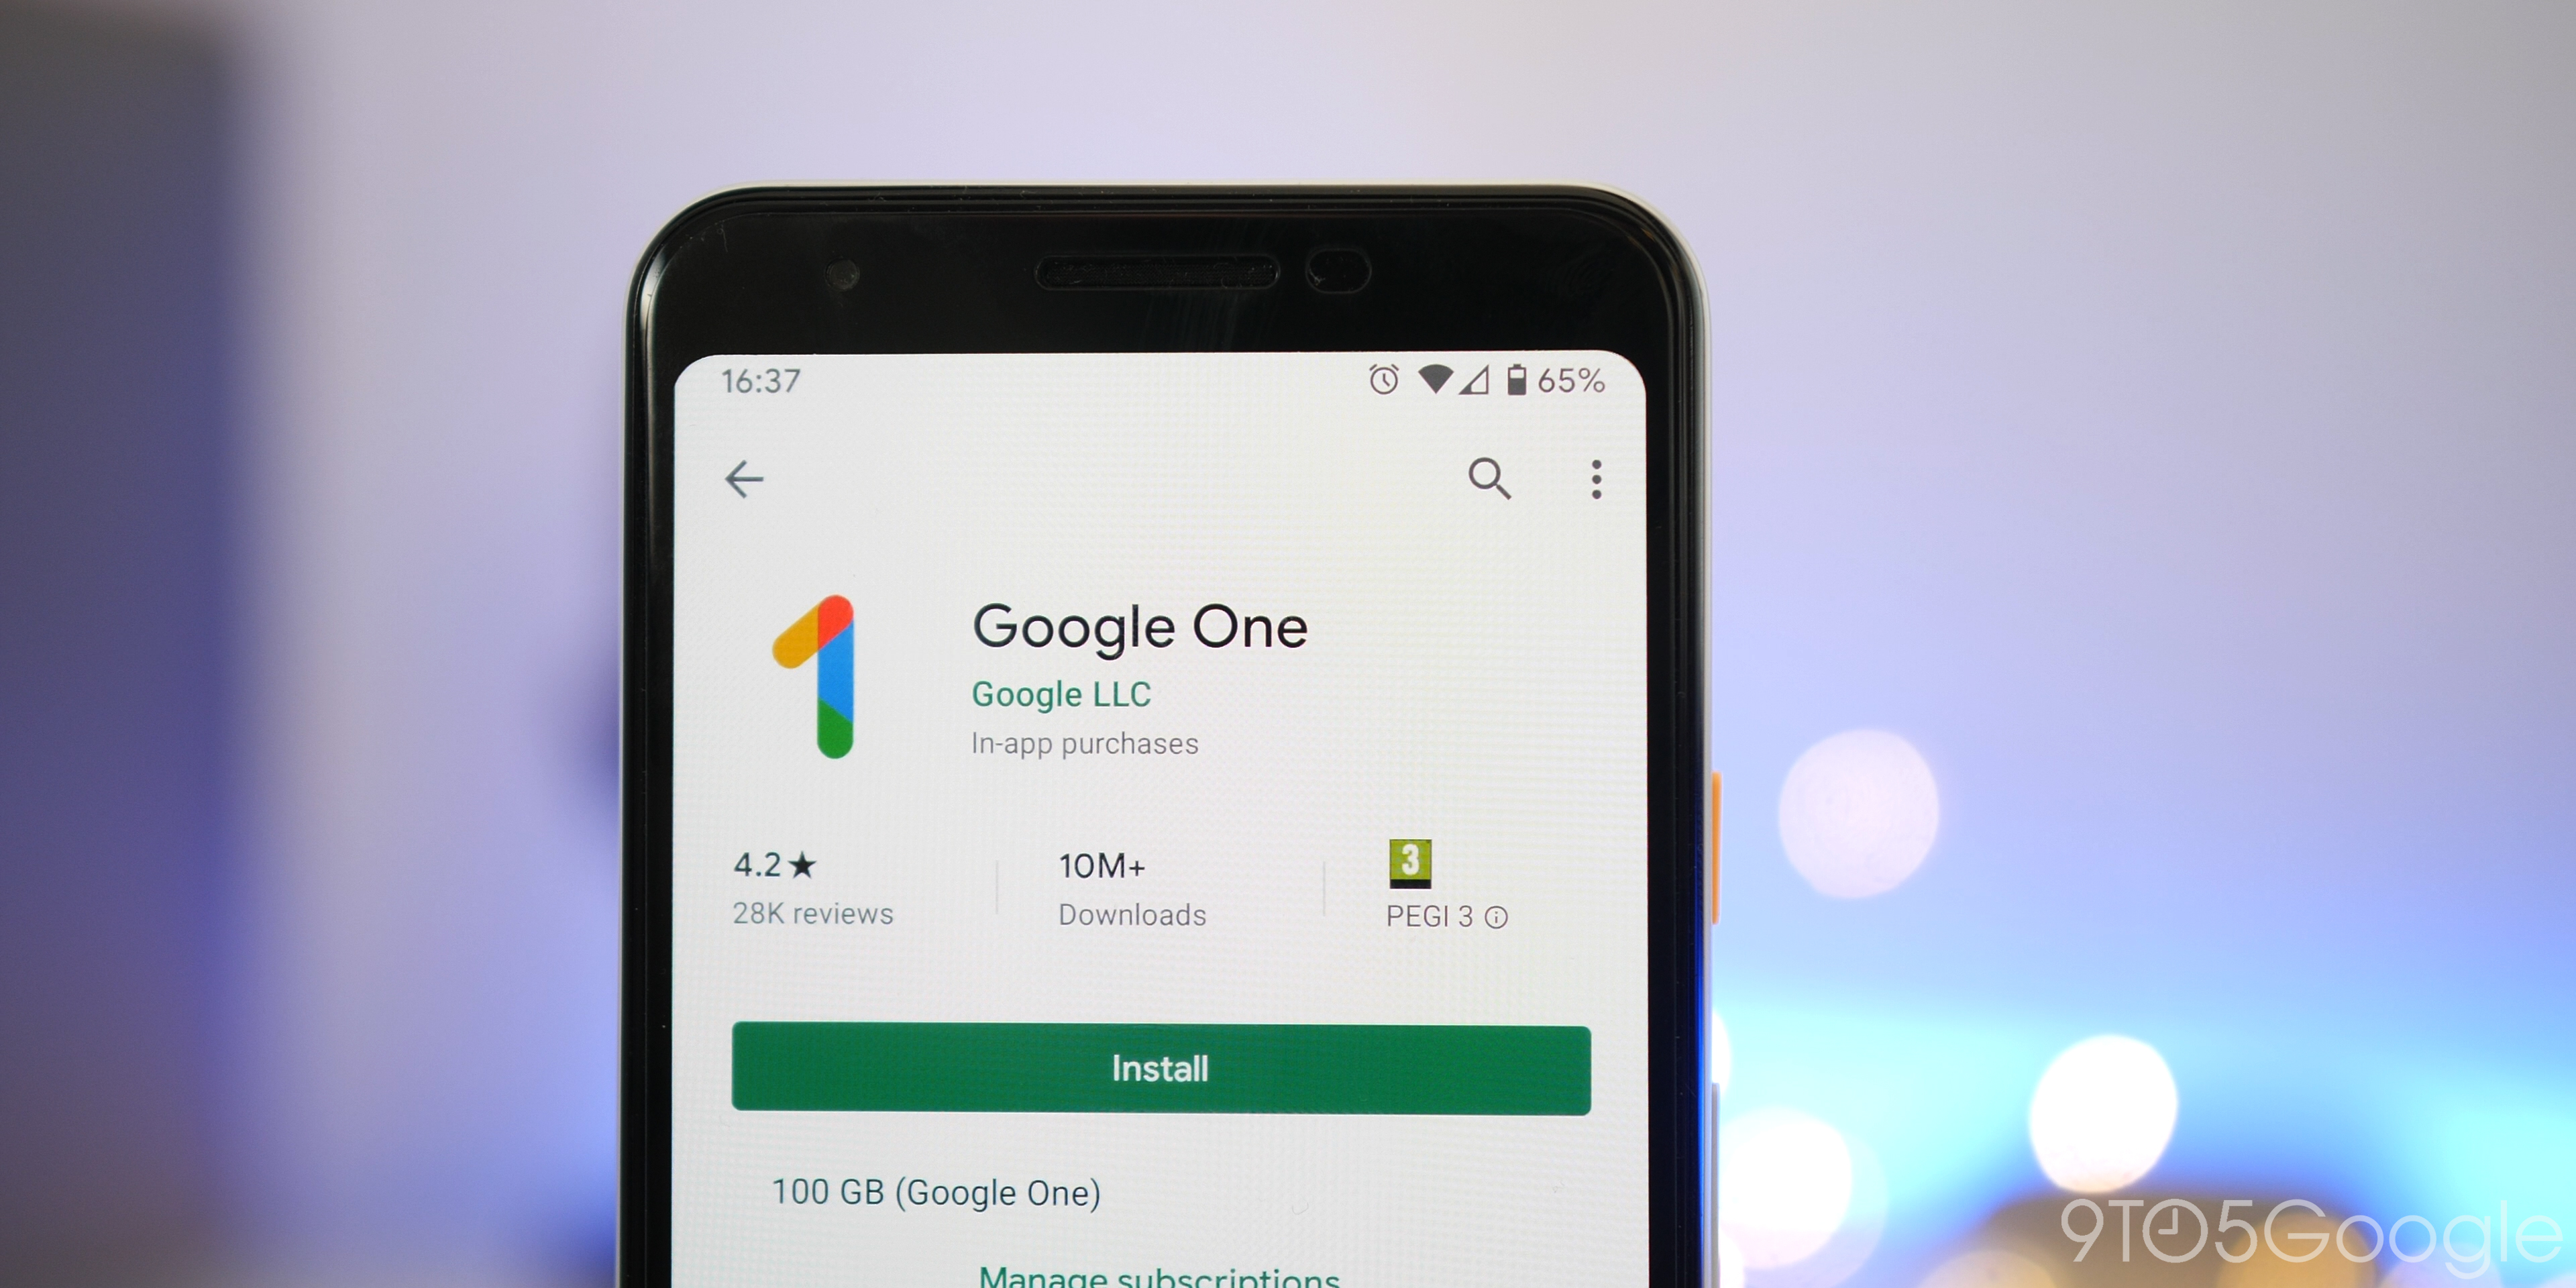 Google Play Store APK 9.1.24 Download On Android: Here's How To Install It